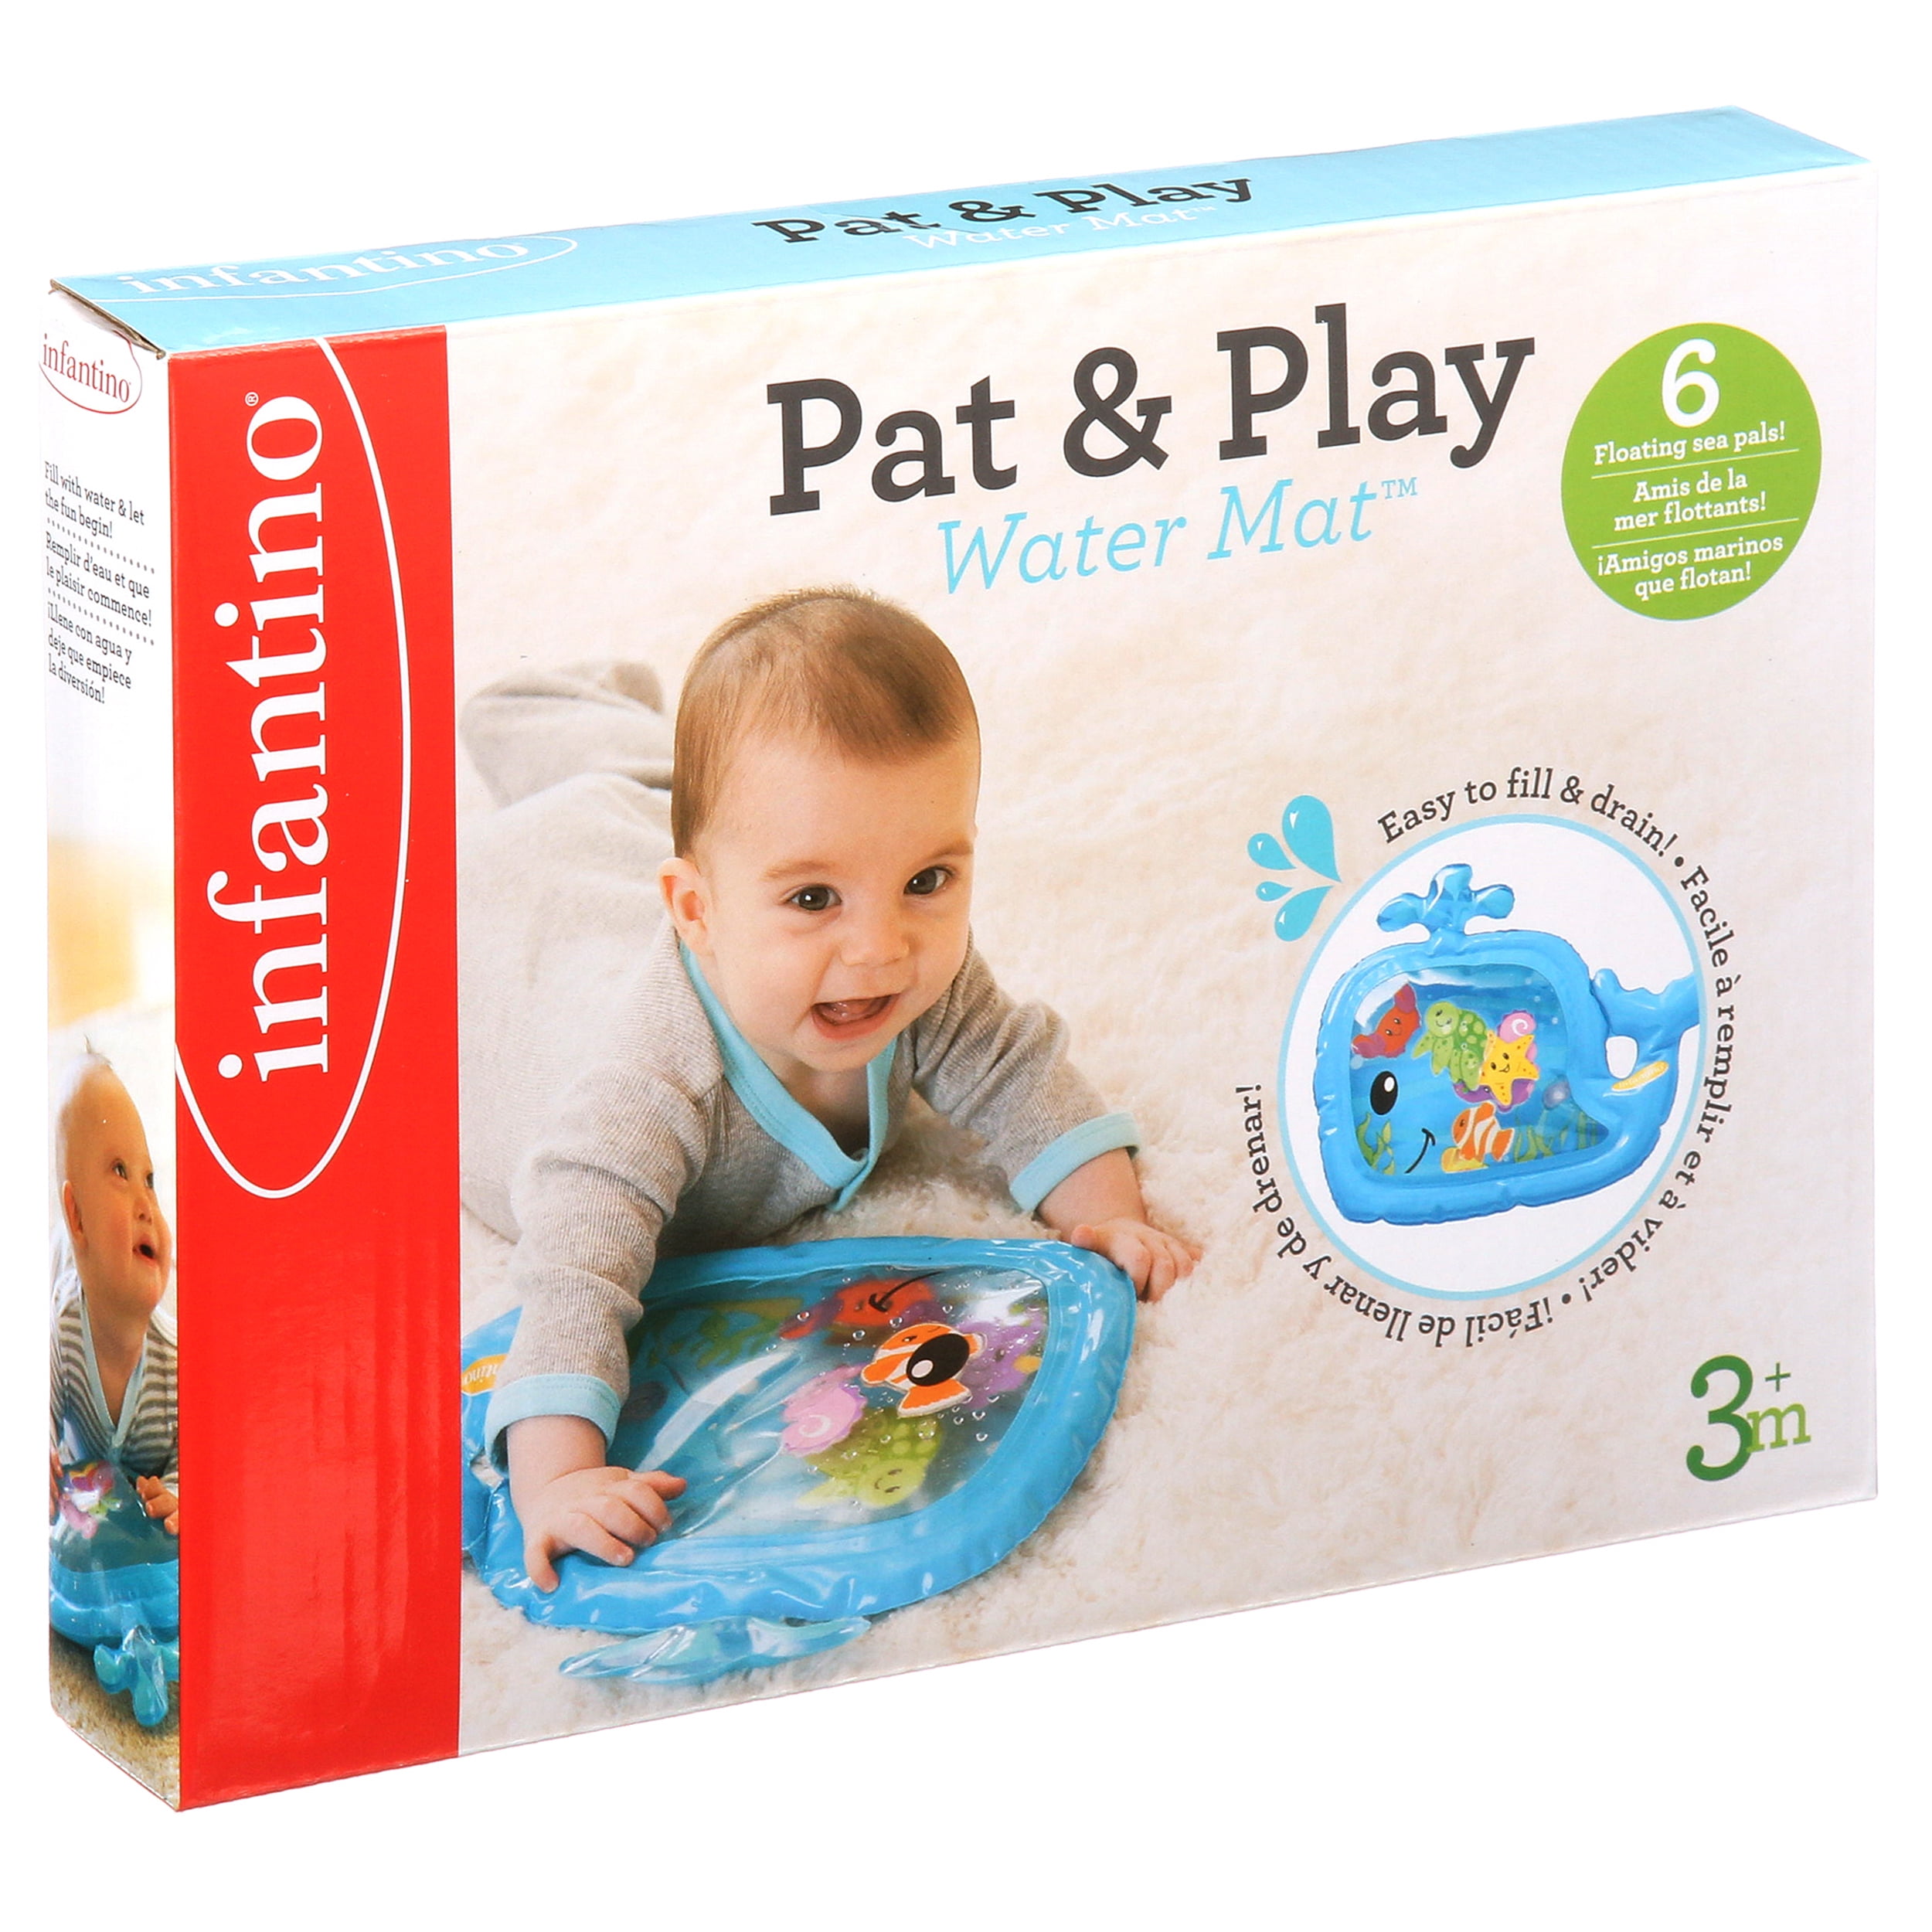 Details about   Infantino Pat & Play Water Mat 